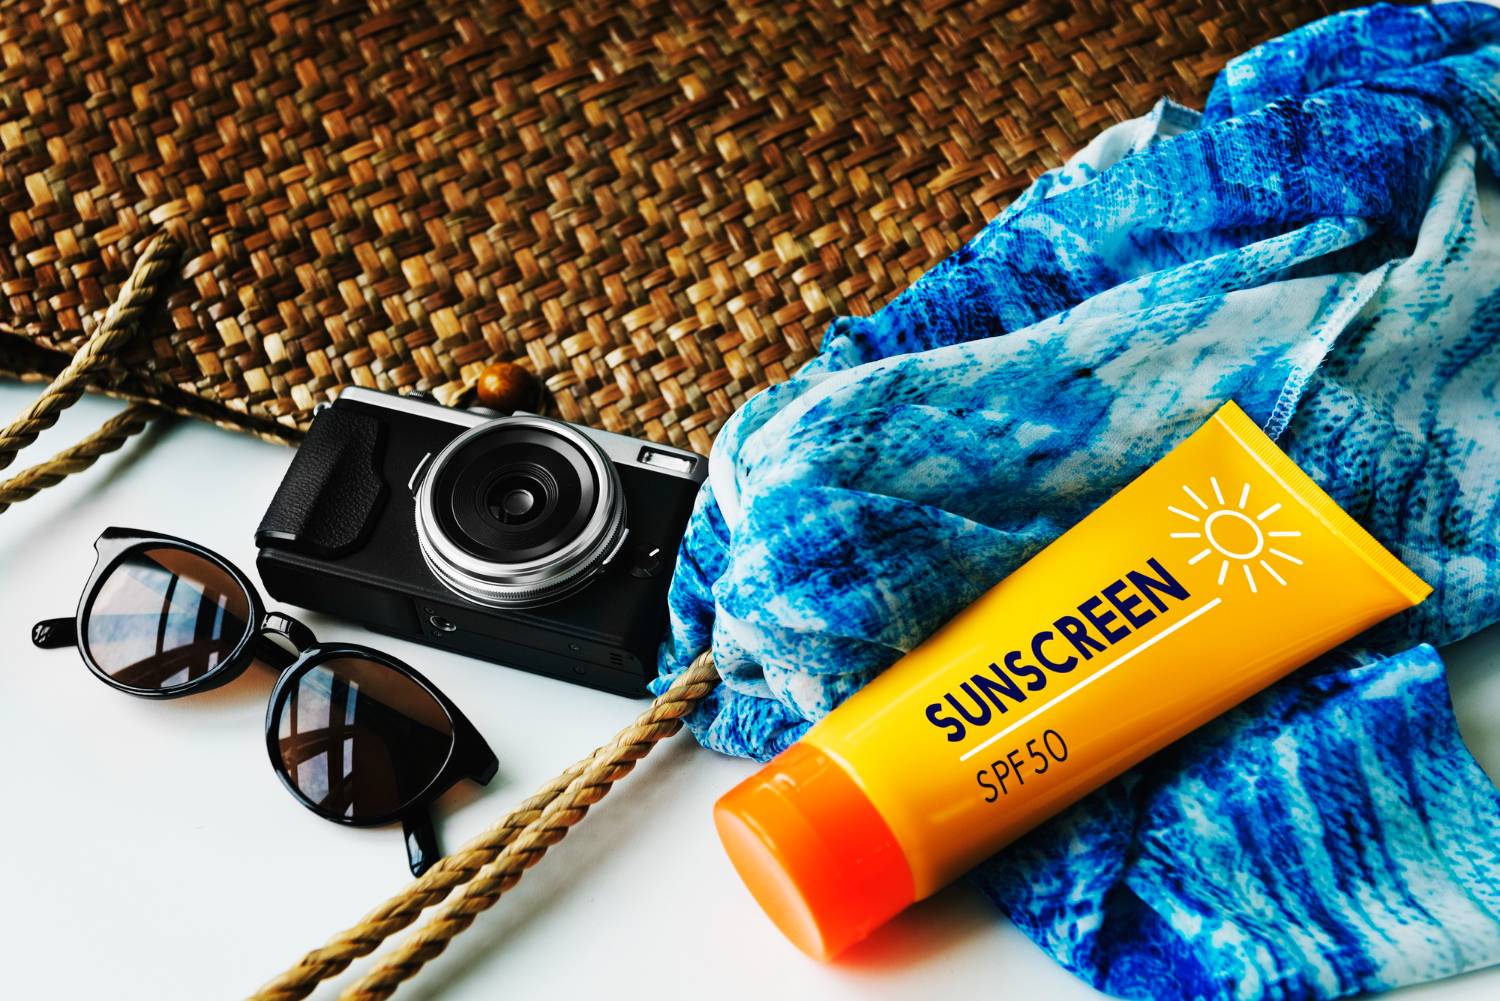 "Essentials for a day at sea: sunscreen SPF50, camera, sunglasses, and a vibrant blue scarf for dolphin encounters."